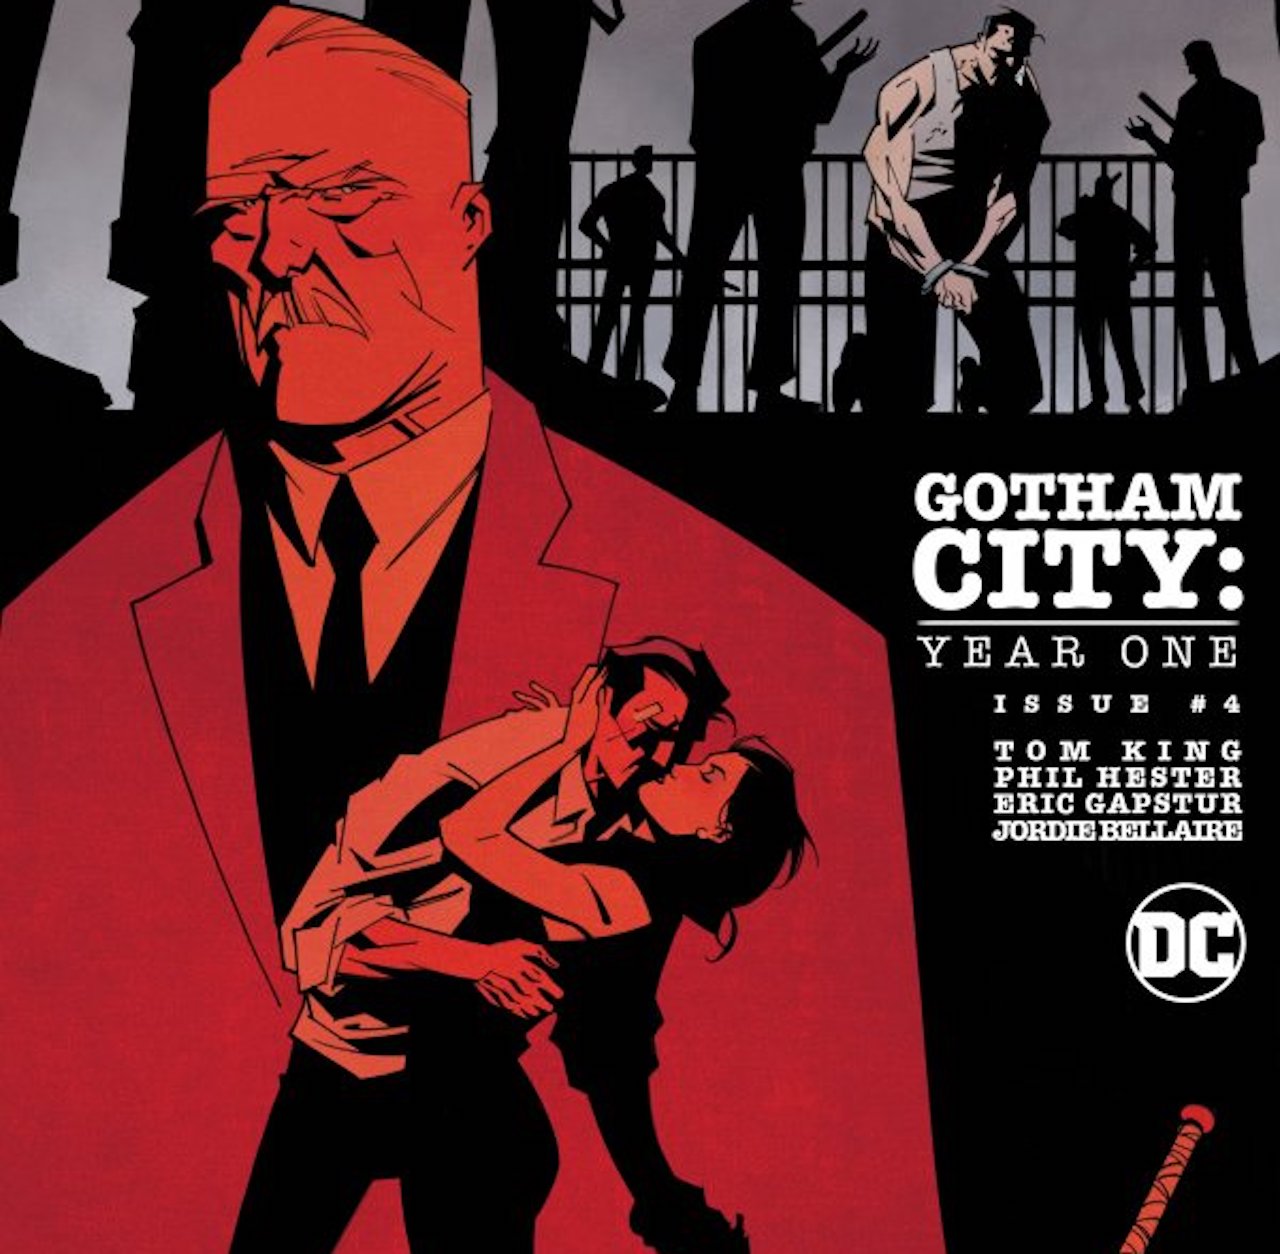 'Gotham City: Year One' #4 reveals how Crime Alley got its name